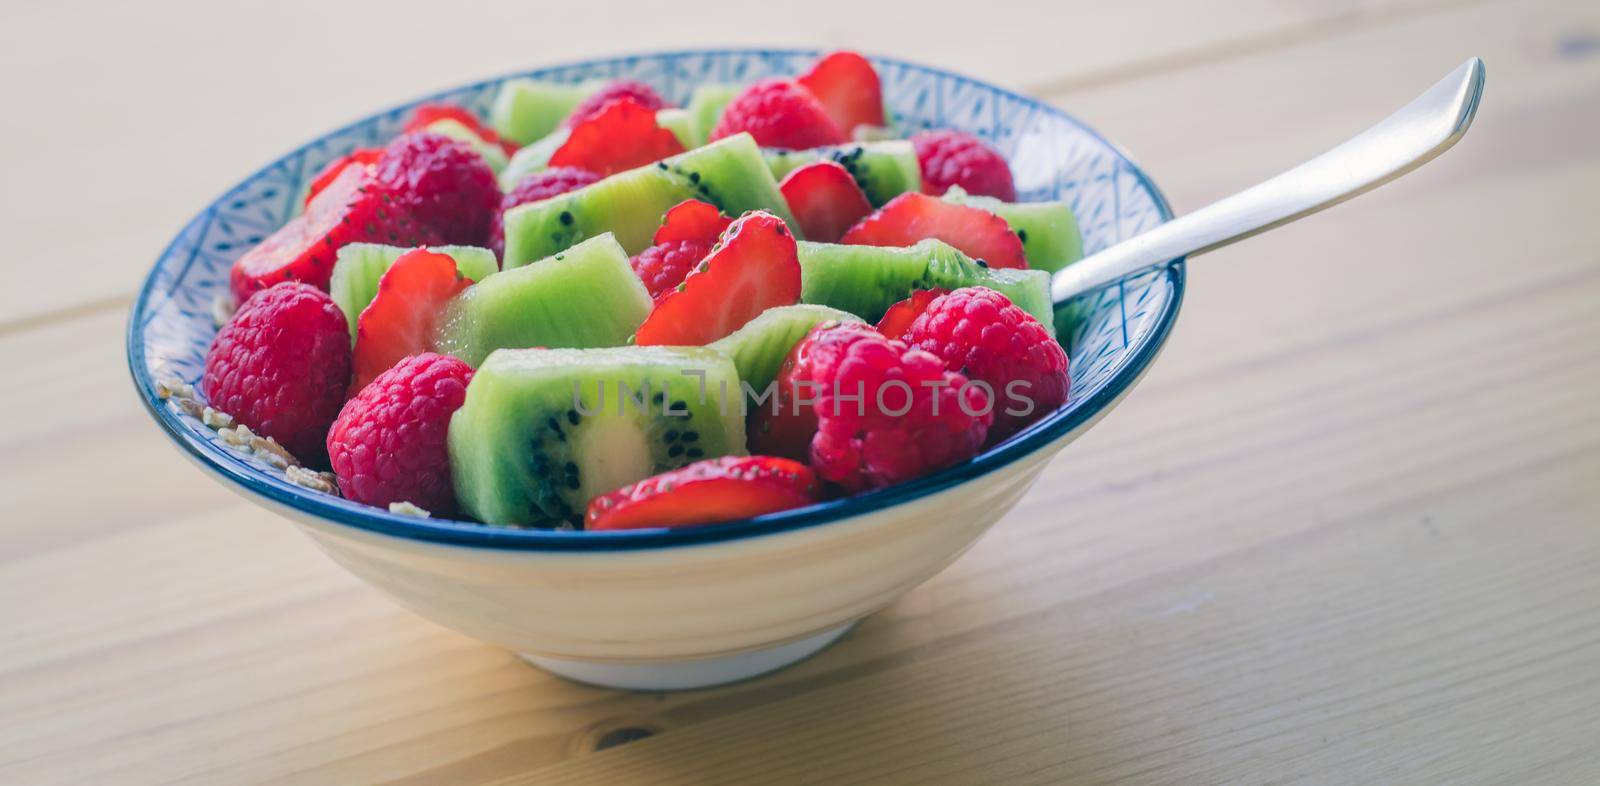 Breakfast fruit bowl with strawberries and kiwis, close up. Healthy lifestyle for vegetarians. by Daxenbichler